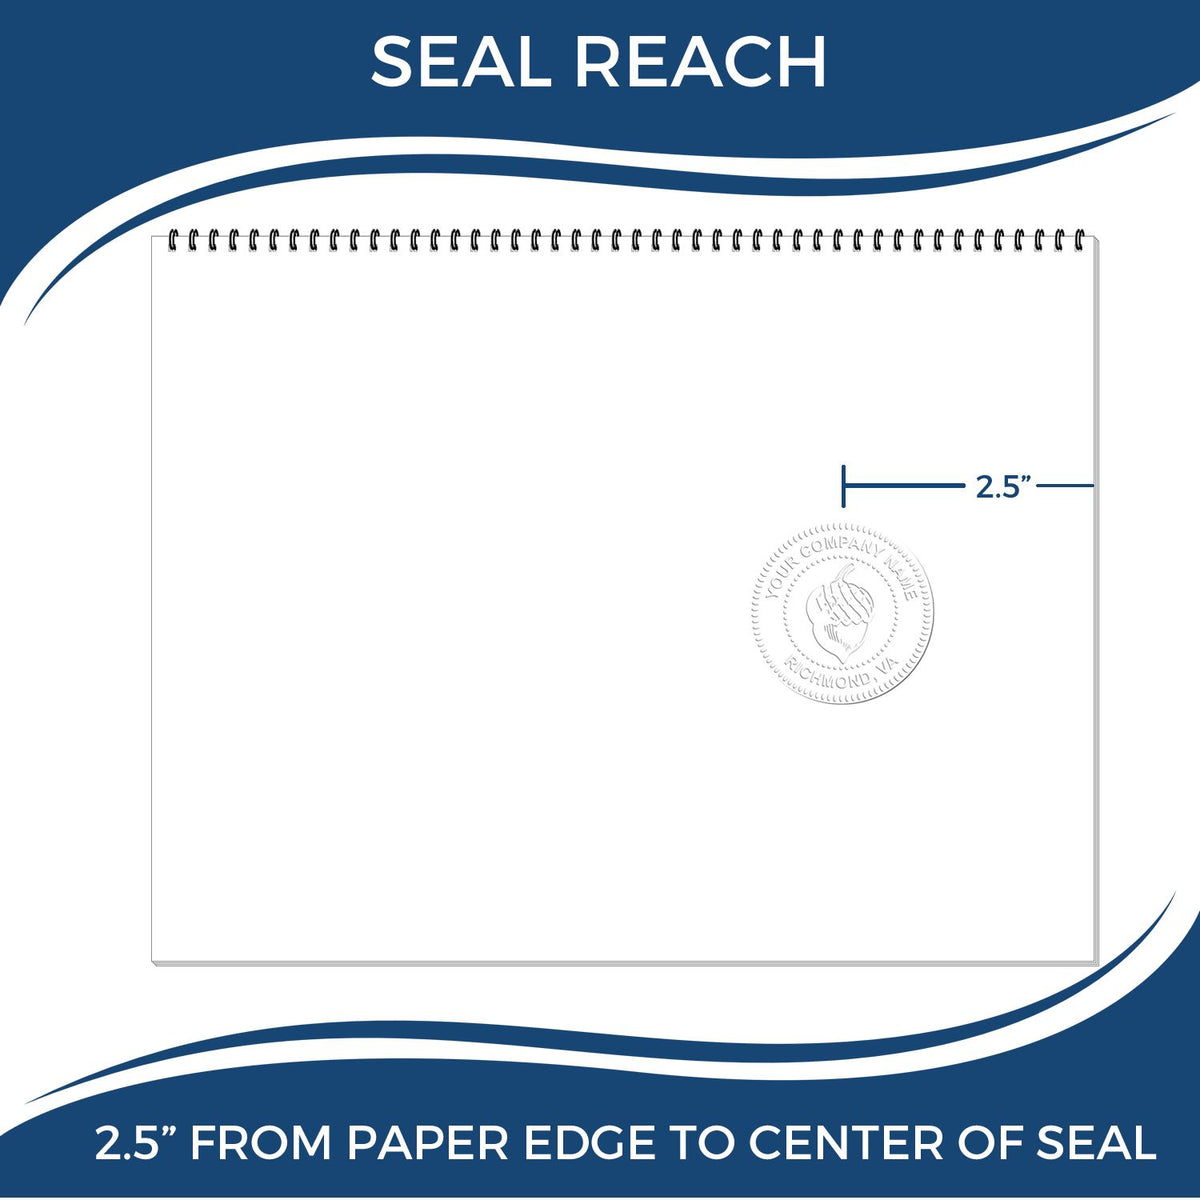 An infographic showing the seal reach which is represented by a ruler and a miniature seal image of the Heavy Duty Cast Iron Maine Geologist Seal Embosser